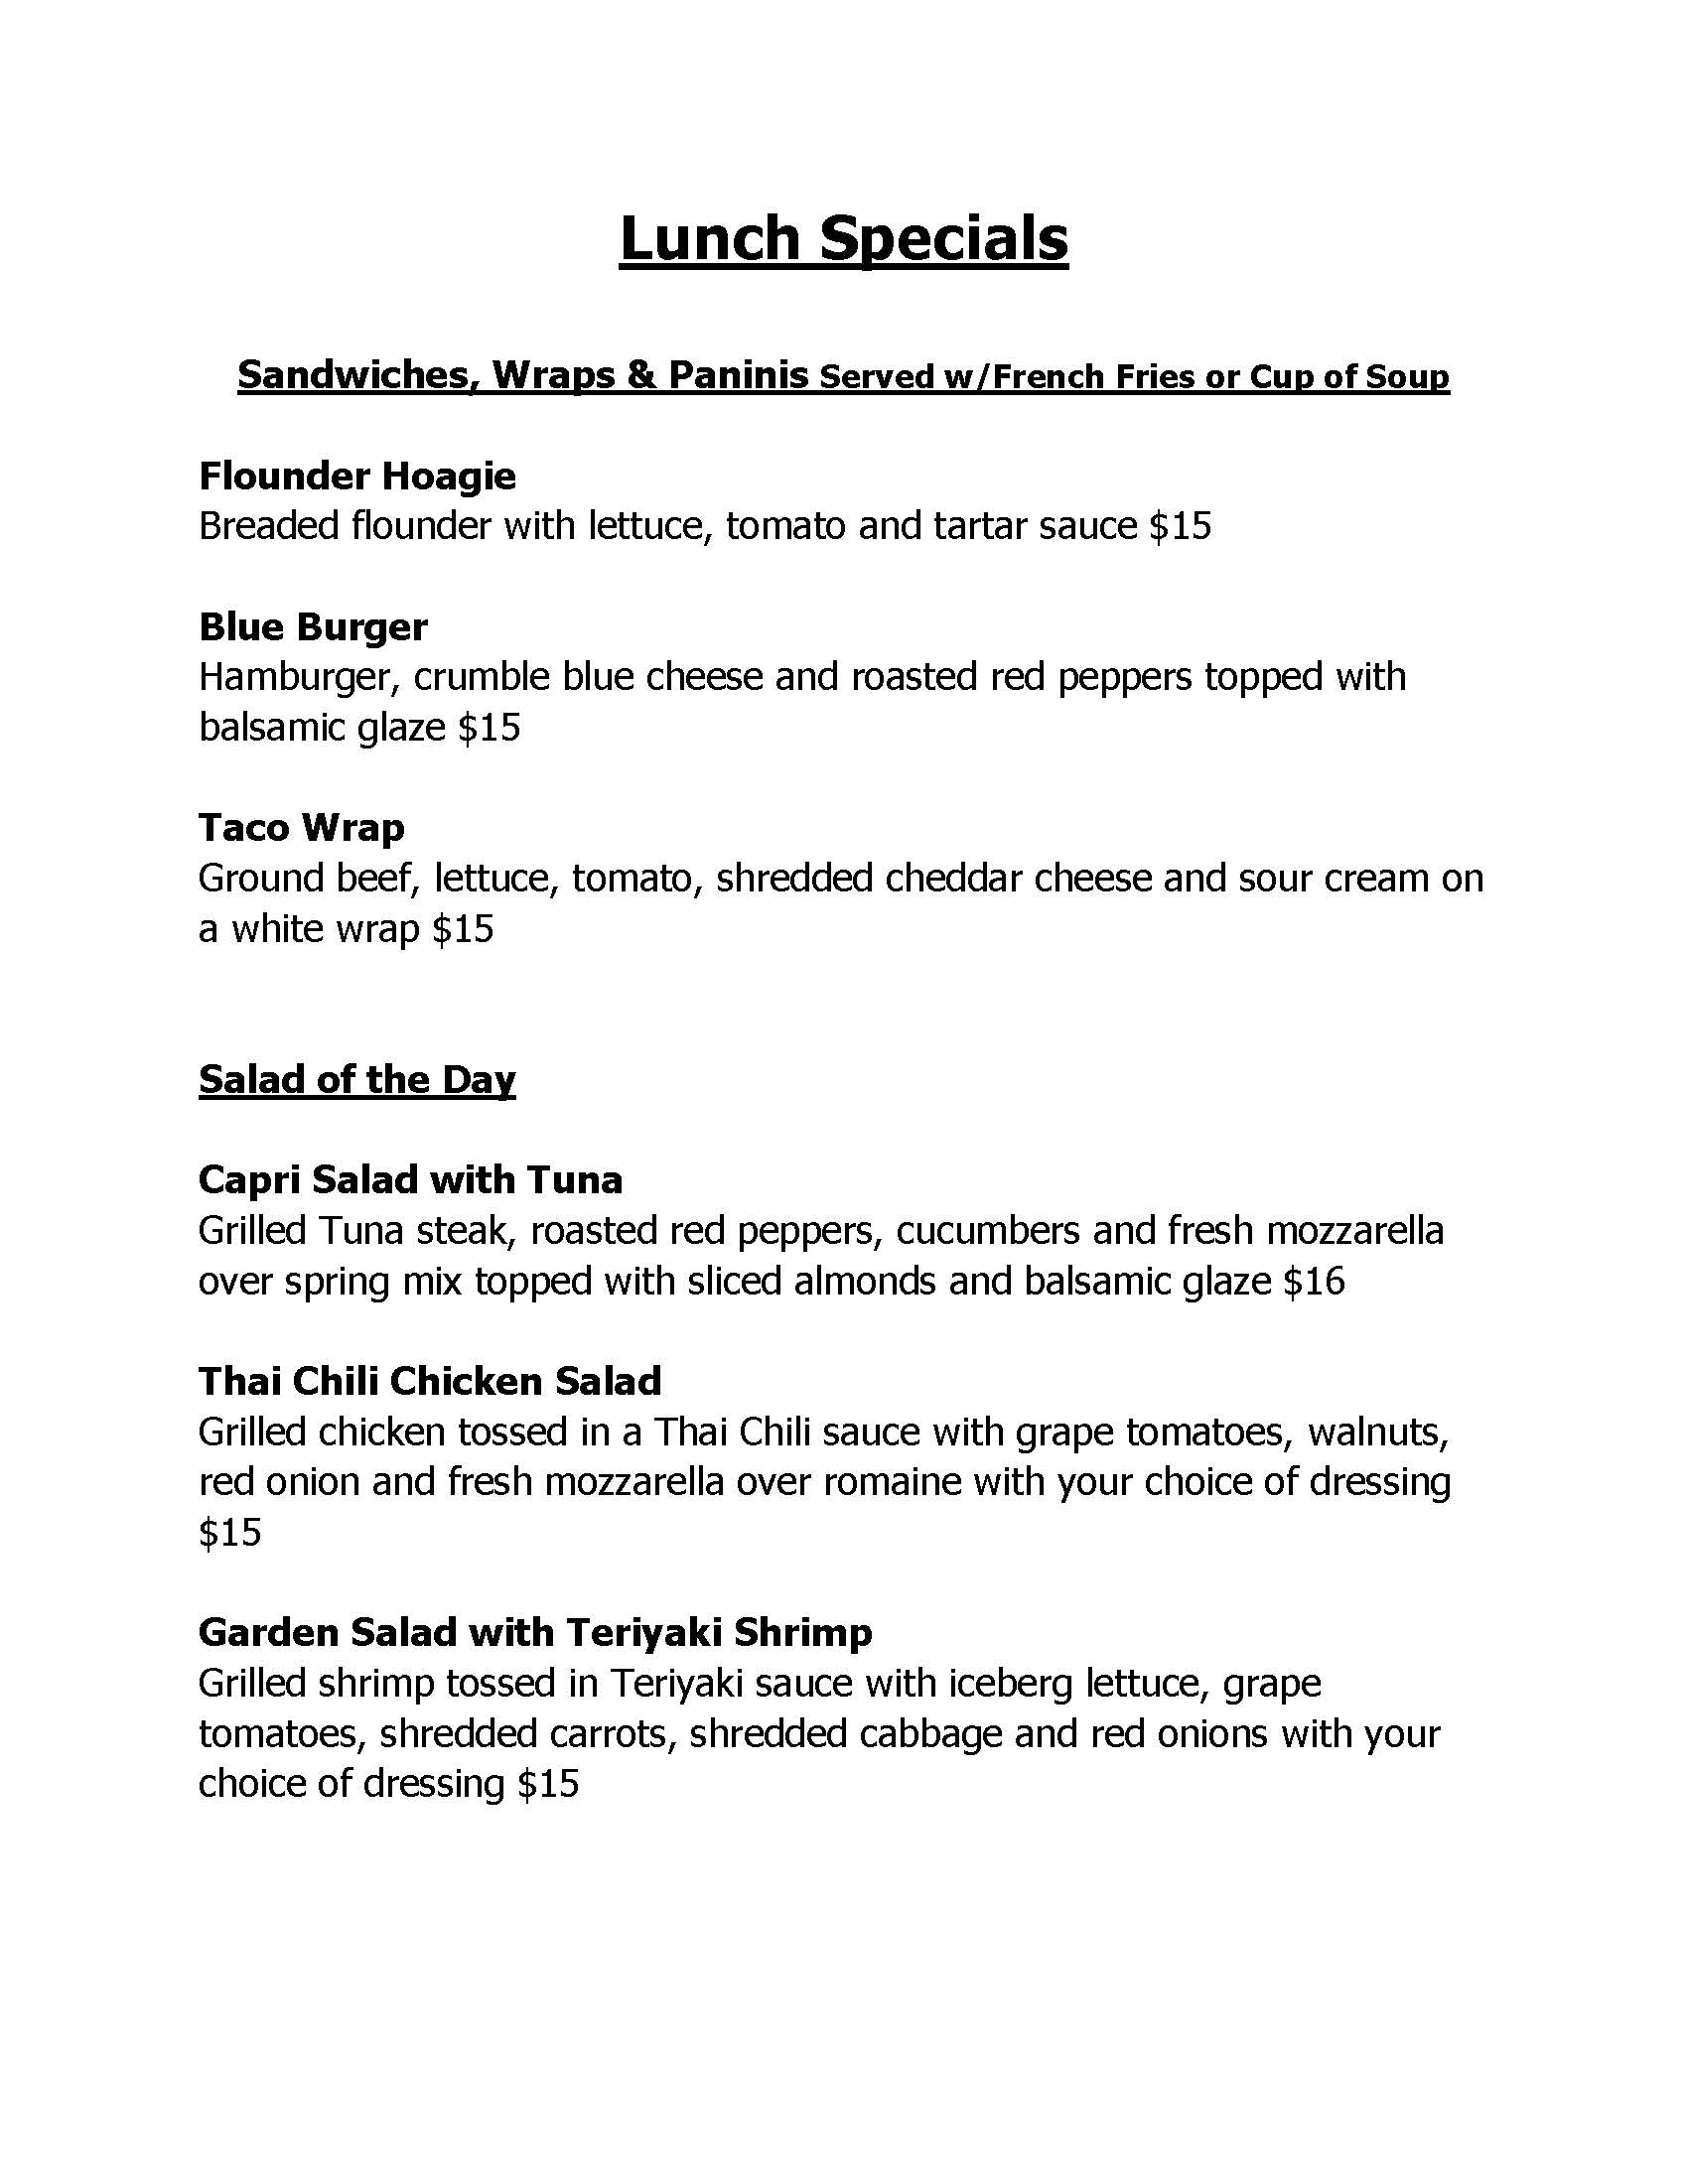 Our Lunch Menu for the weekly Specials